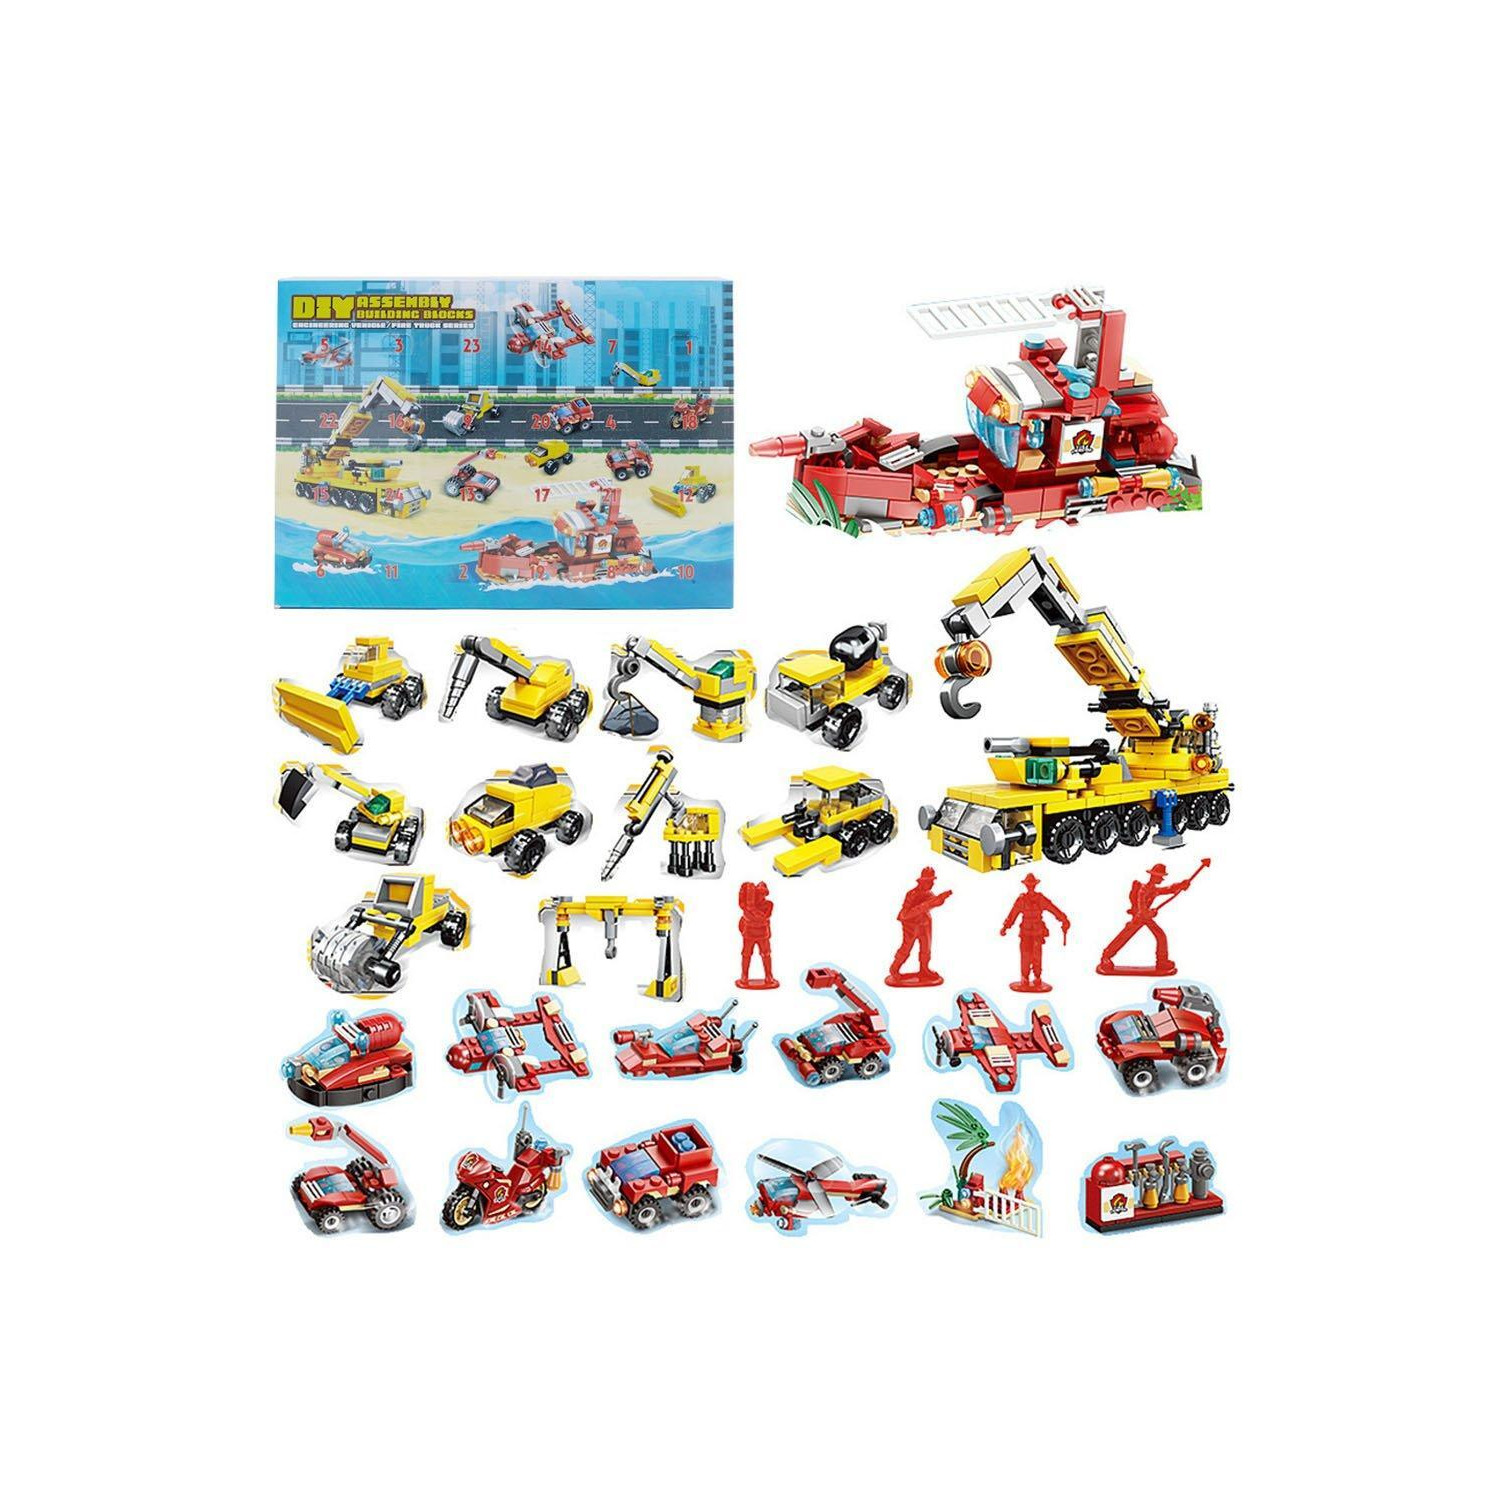 Kids Fire Truck Vehicles Building Blocks Toy Gift - image 1